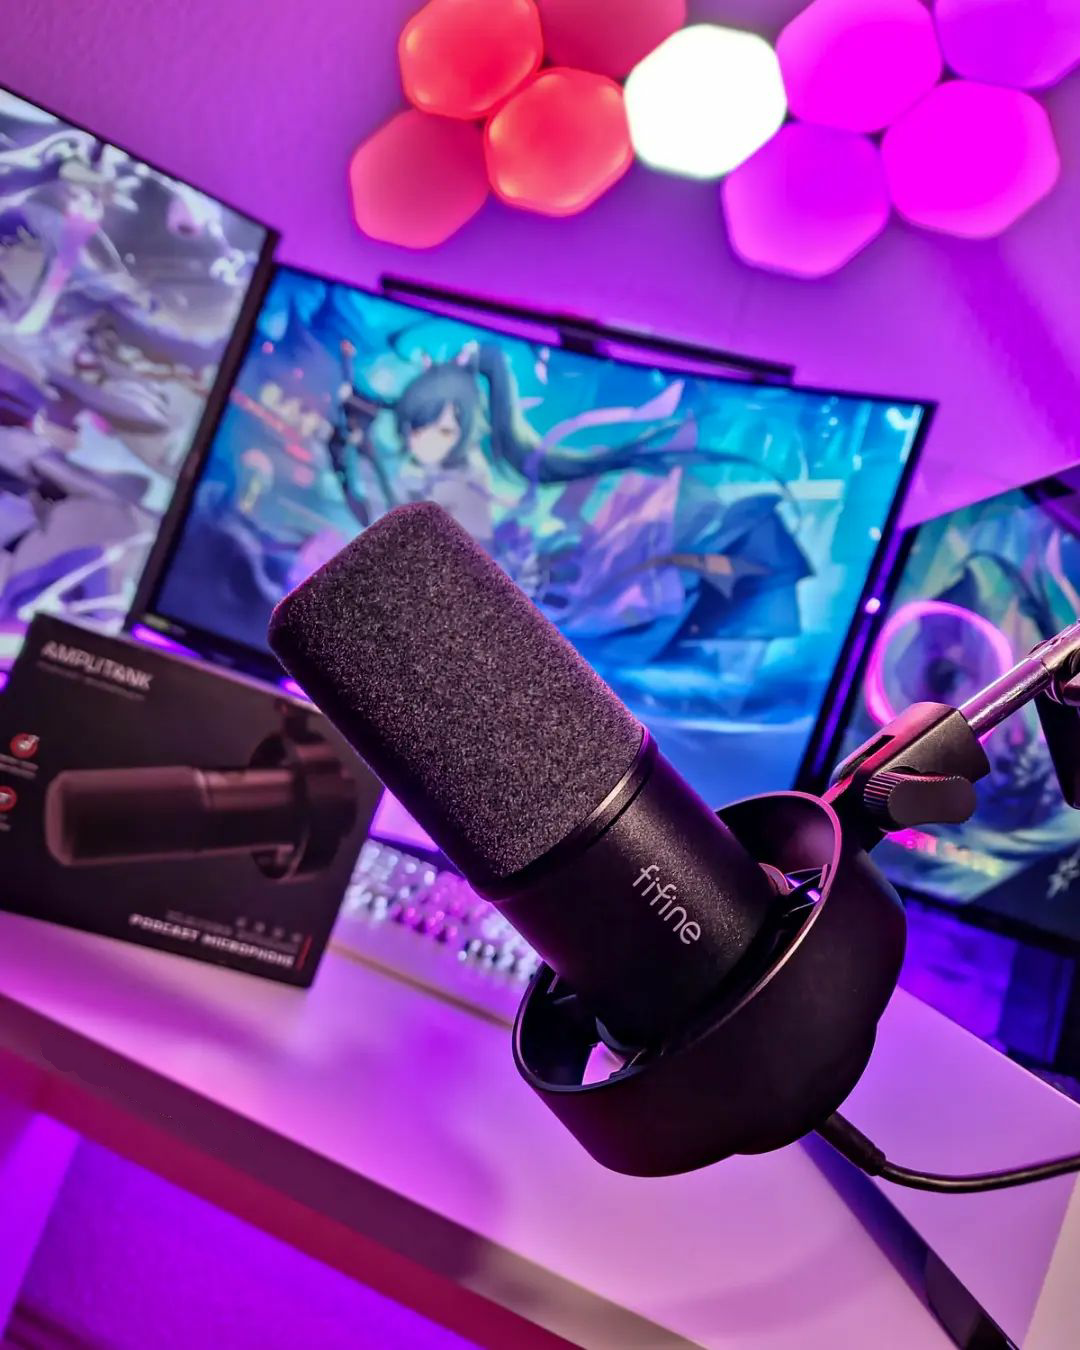 FIFINE AMPLIGAME AM8 USB Gaming Microphone and AMPLITANK K688 Dynamic USB  Microphone launched in India